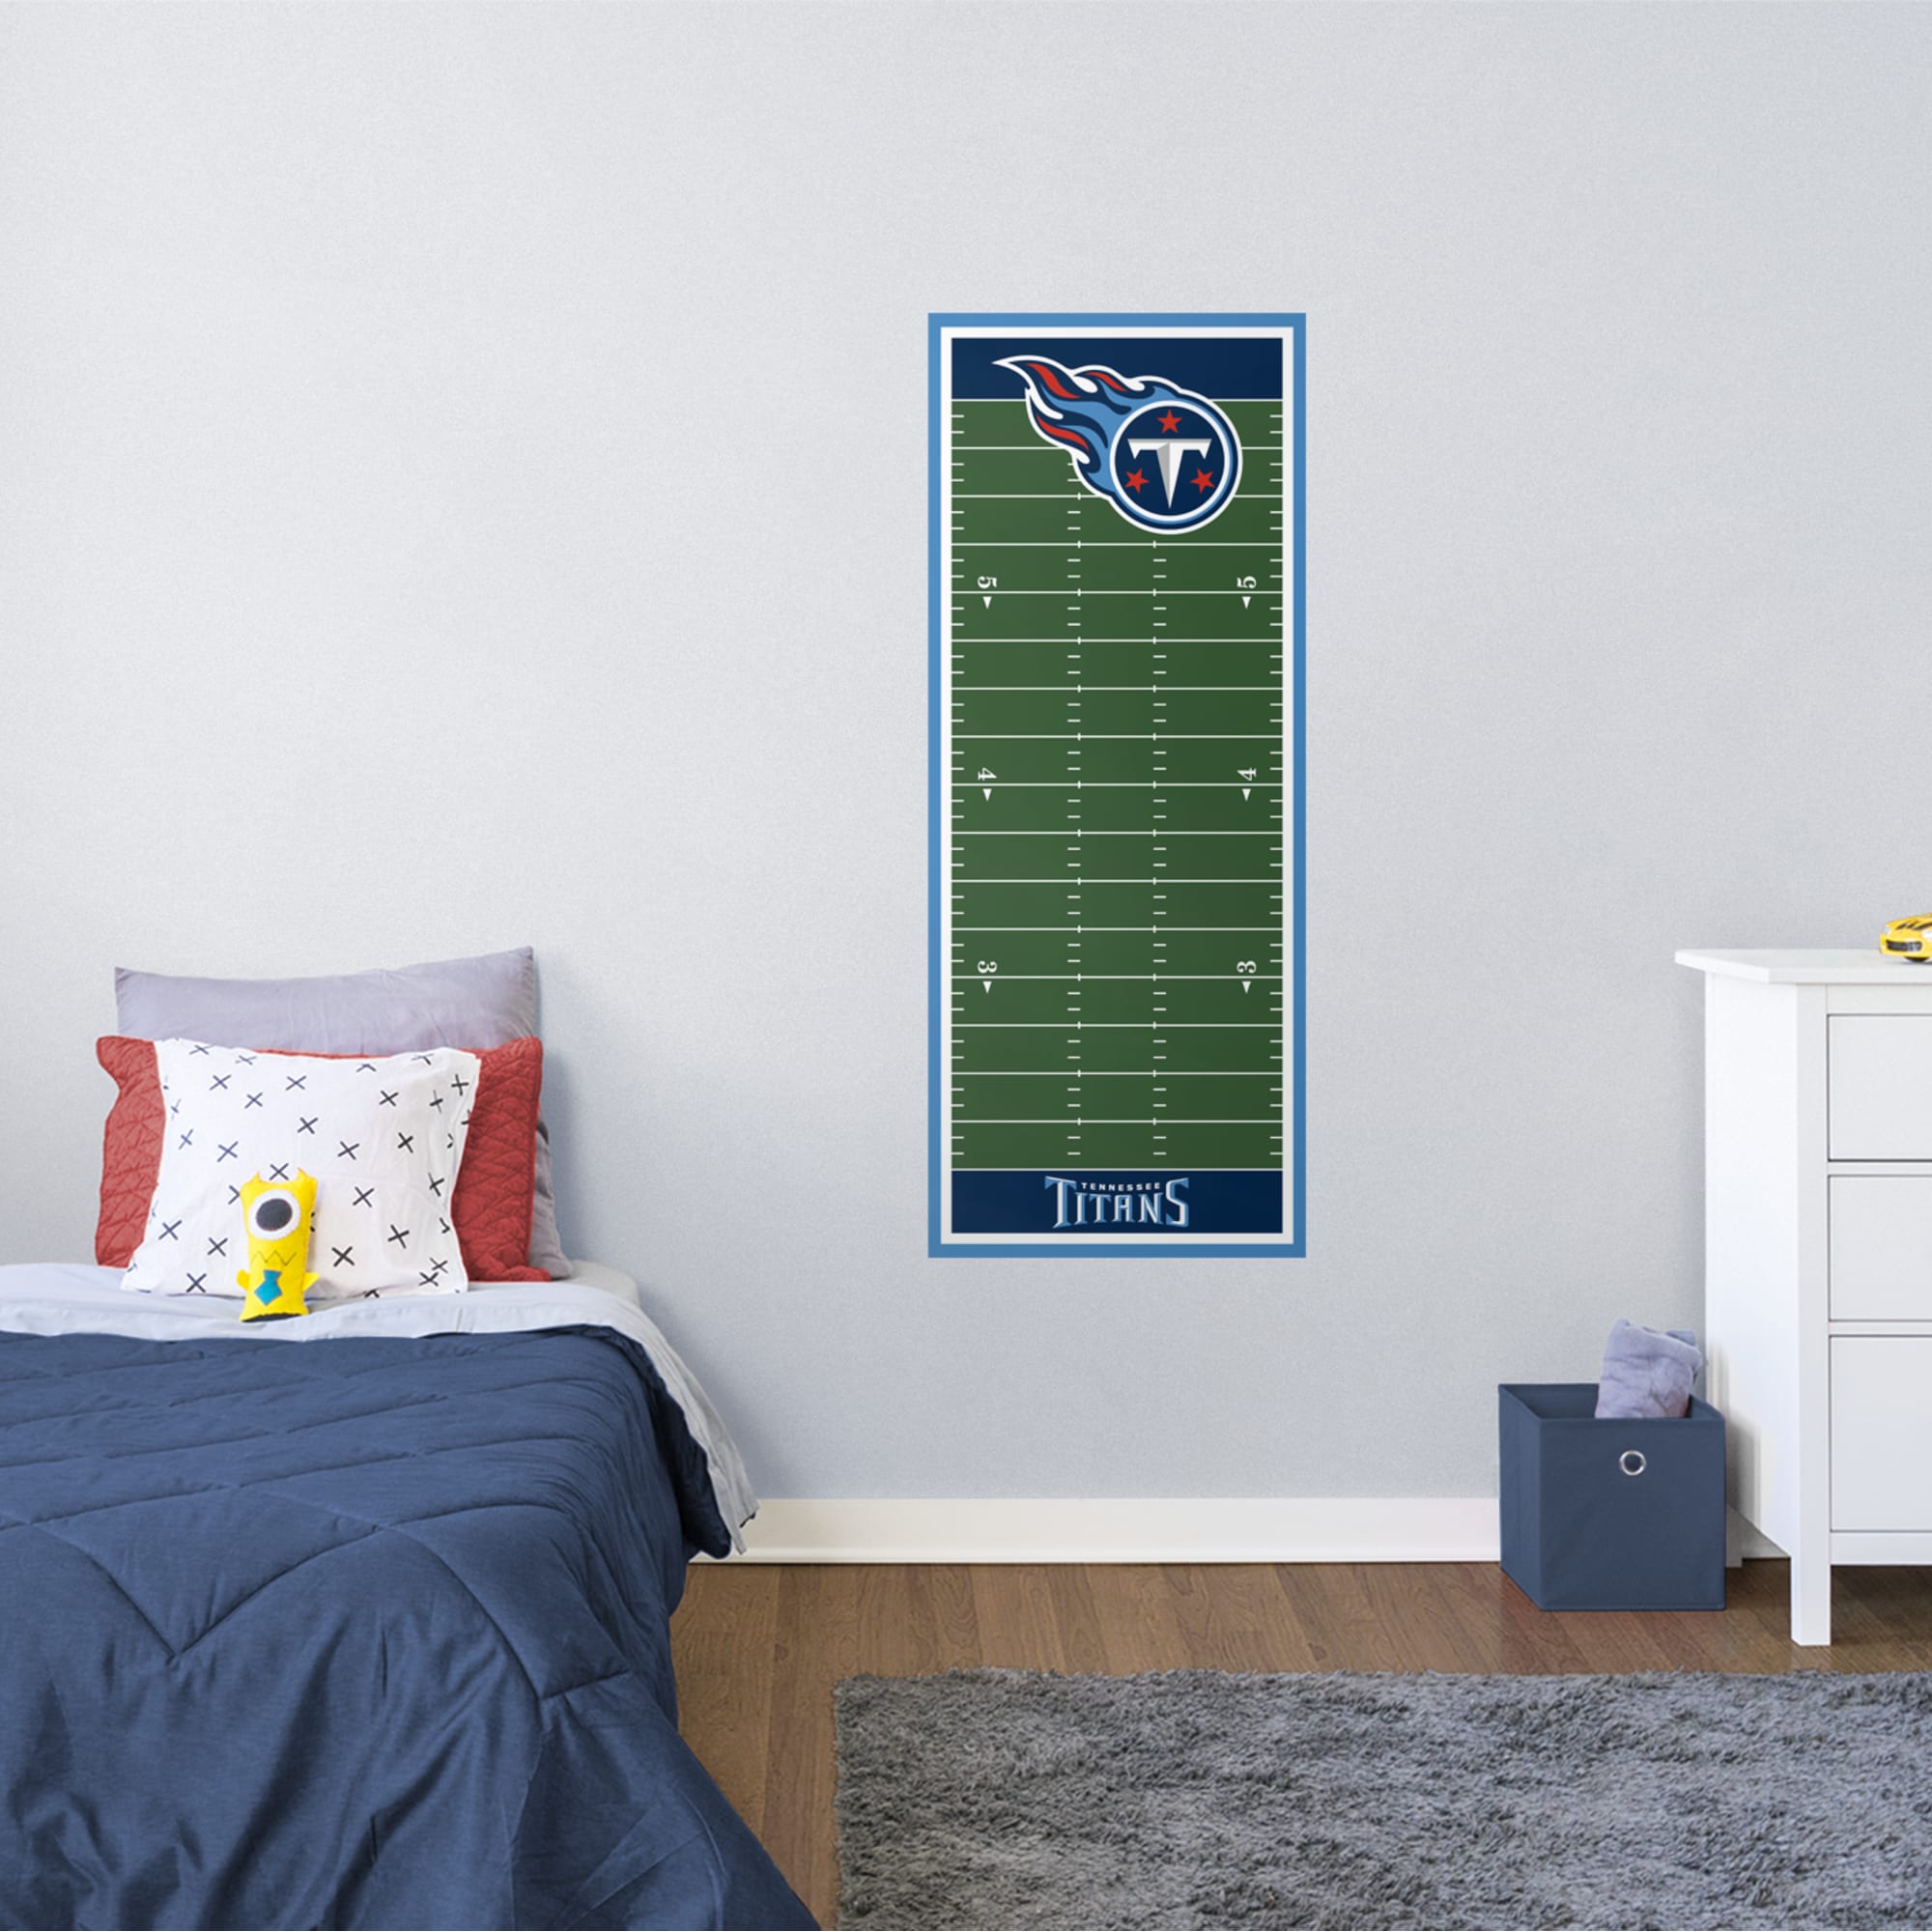 Tennessee Titans: Growth Chart - Officially Licensed NFL Removable Wall Graphic 24.0"W x 59.0"H by Fathead | Vinyl